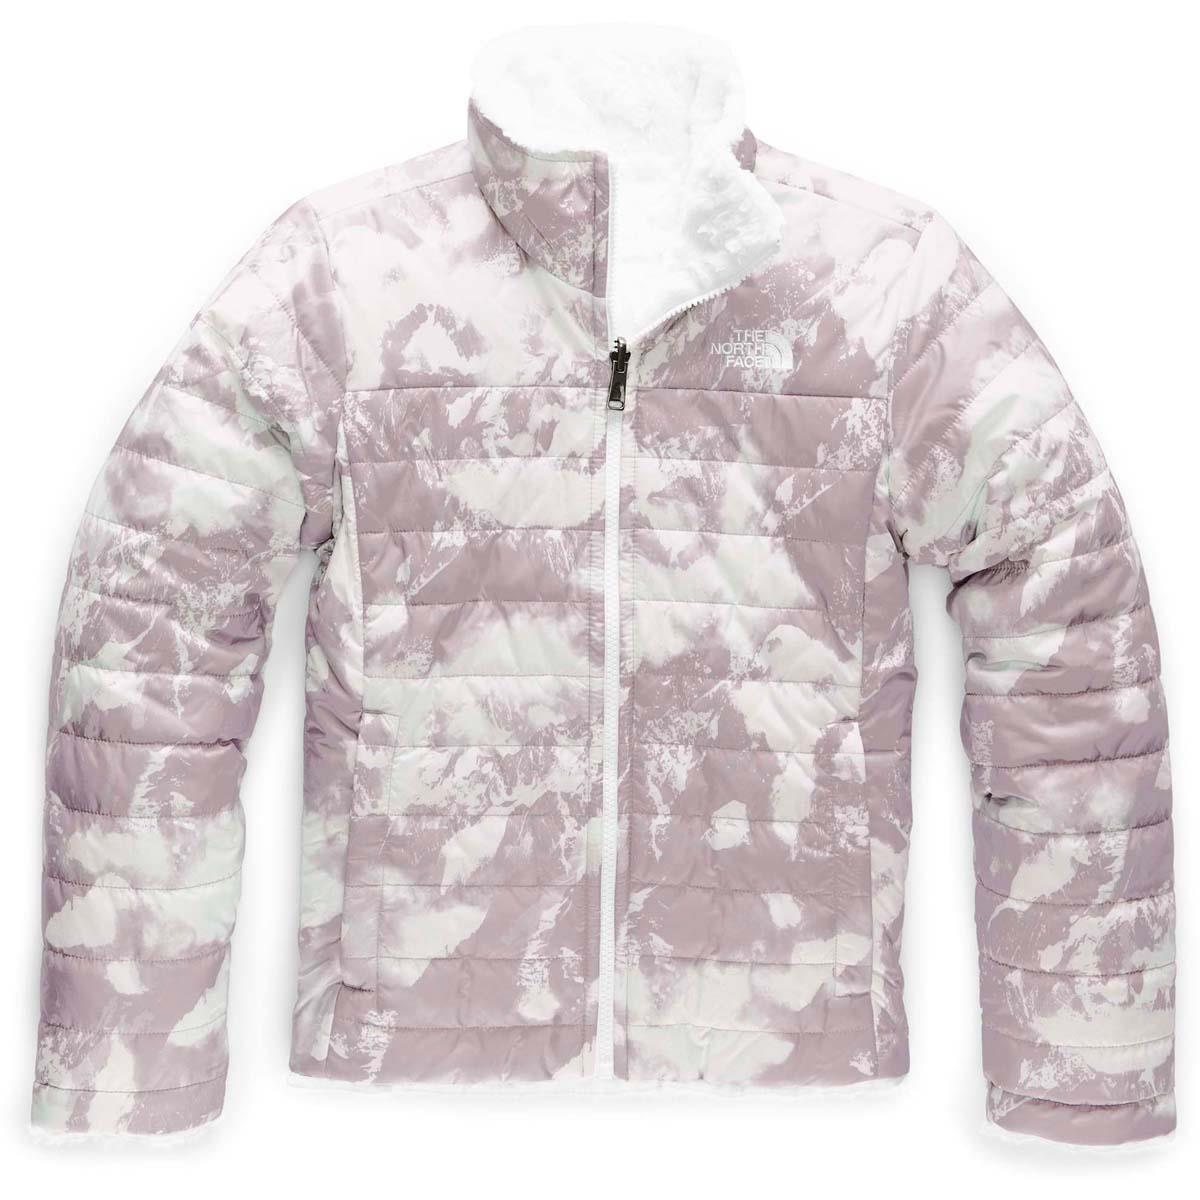 The North Face Reversible Mossbud Swirl 